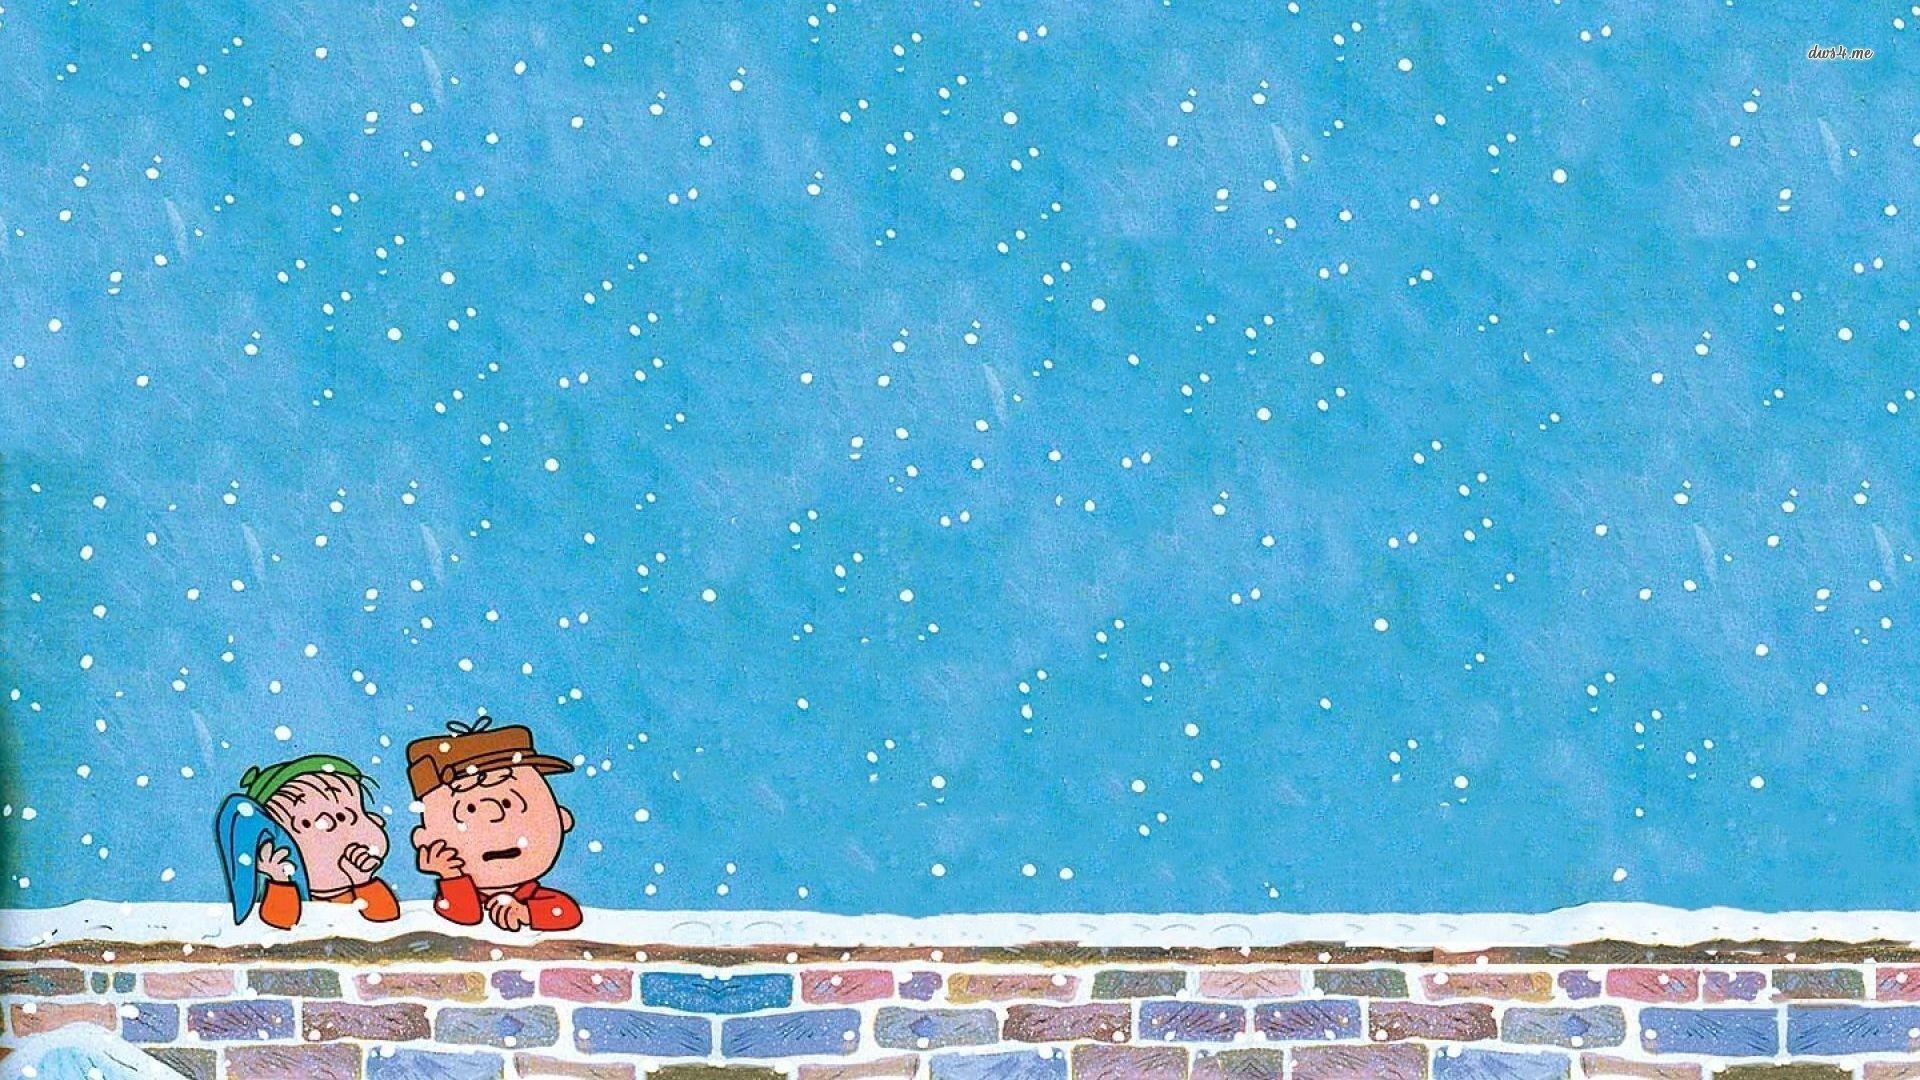 Charlie Brown Christmas Wallpaper 49 images